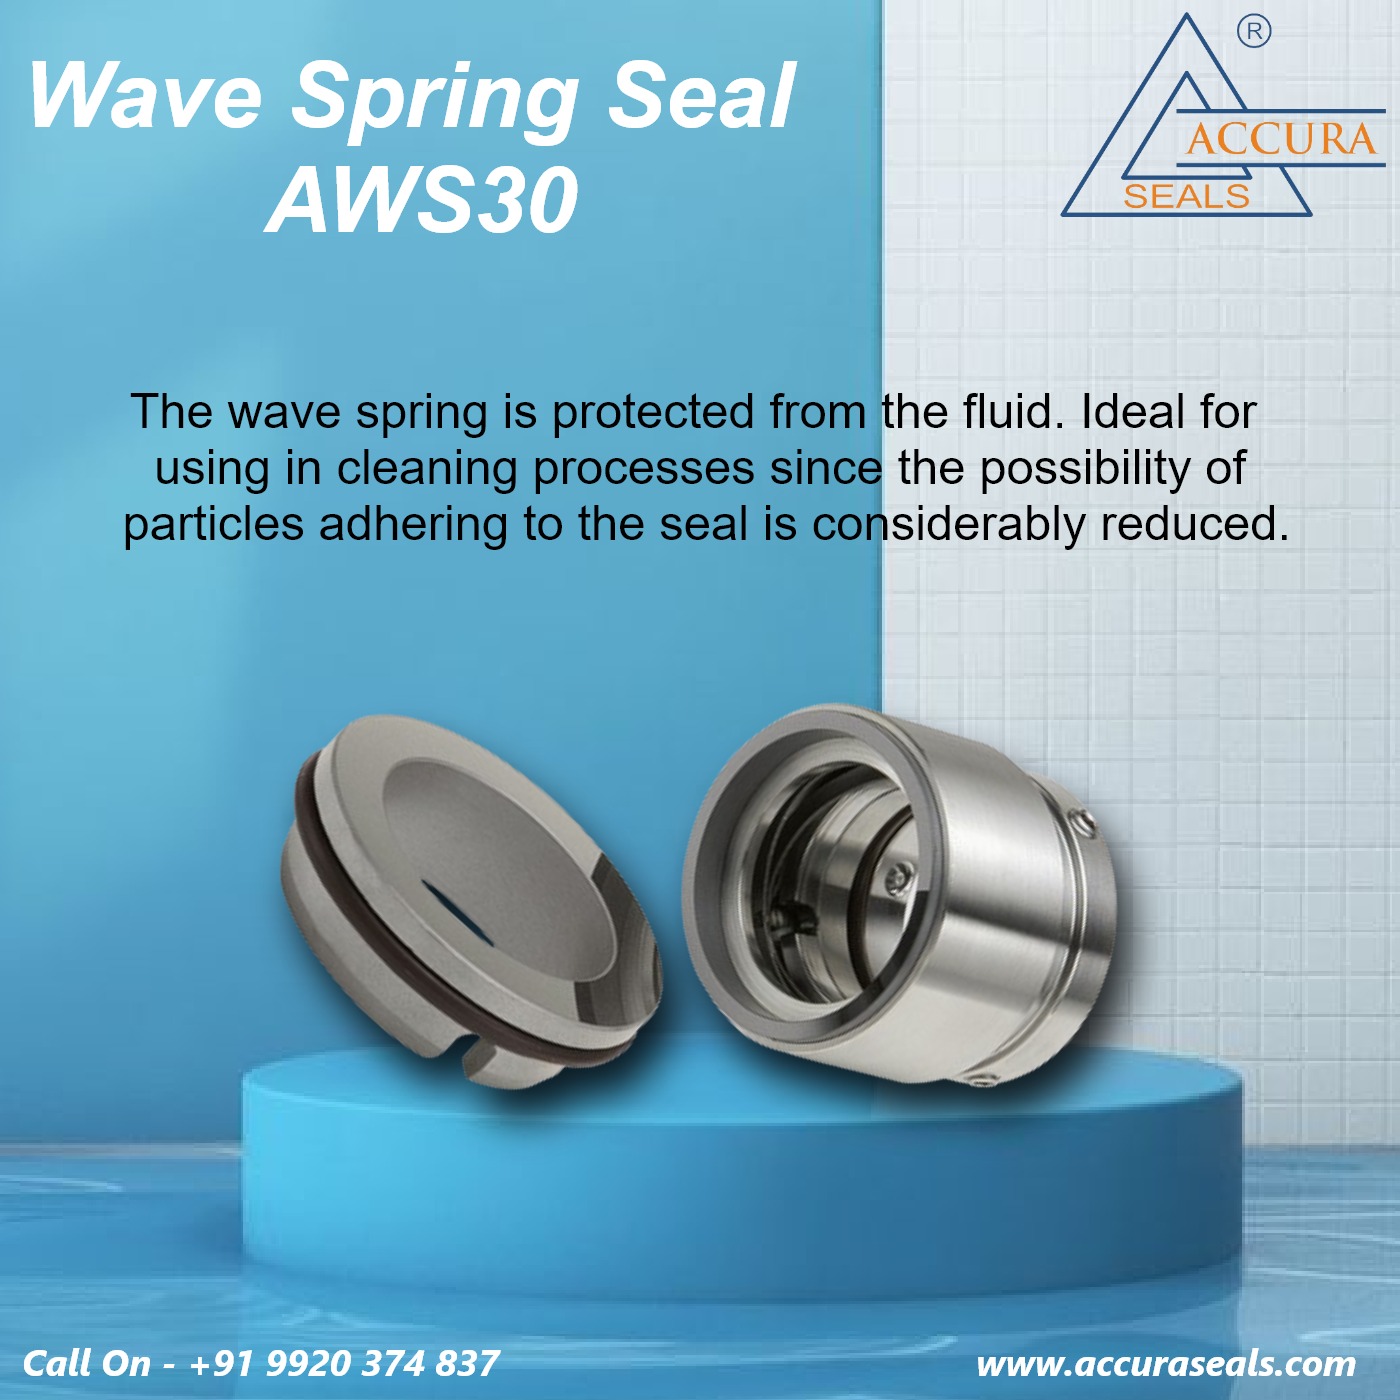 Accura Seals - Wave Spring Seal AWS30 for Optimal Performance